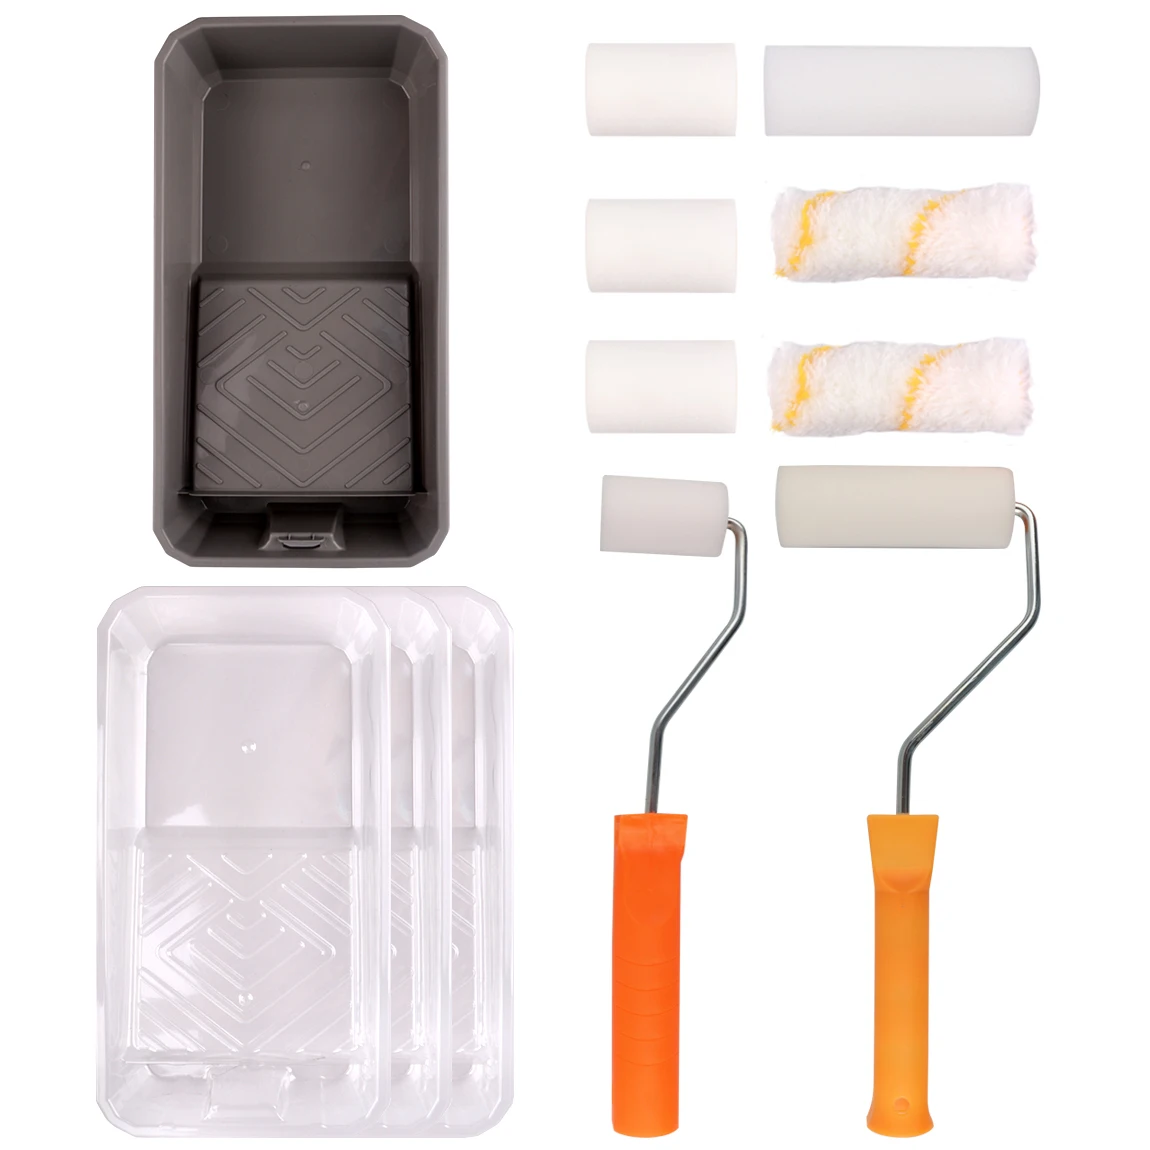 14pcs Paint Roller Set, 4 inch 2 inch Paint Roller Brush Kit with Trays,Roller Frame,Home Painting Supplies for Wall,Cabinet lab supplies 0 1ml 4 strips pcr tubes with optical 4 strip pcr tube